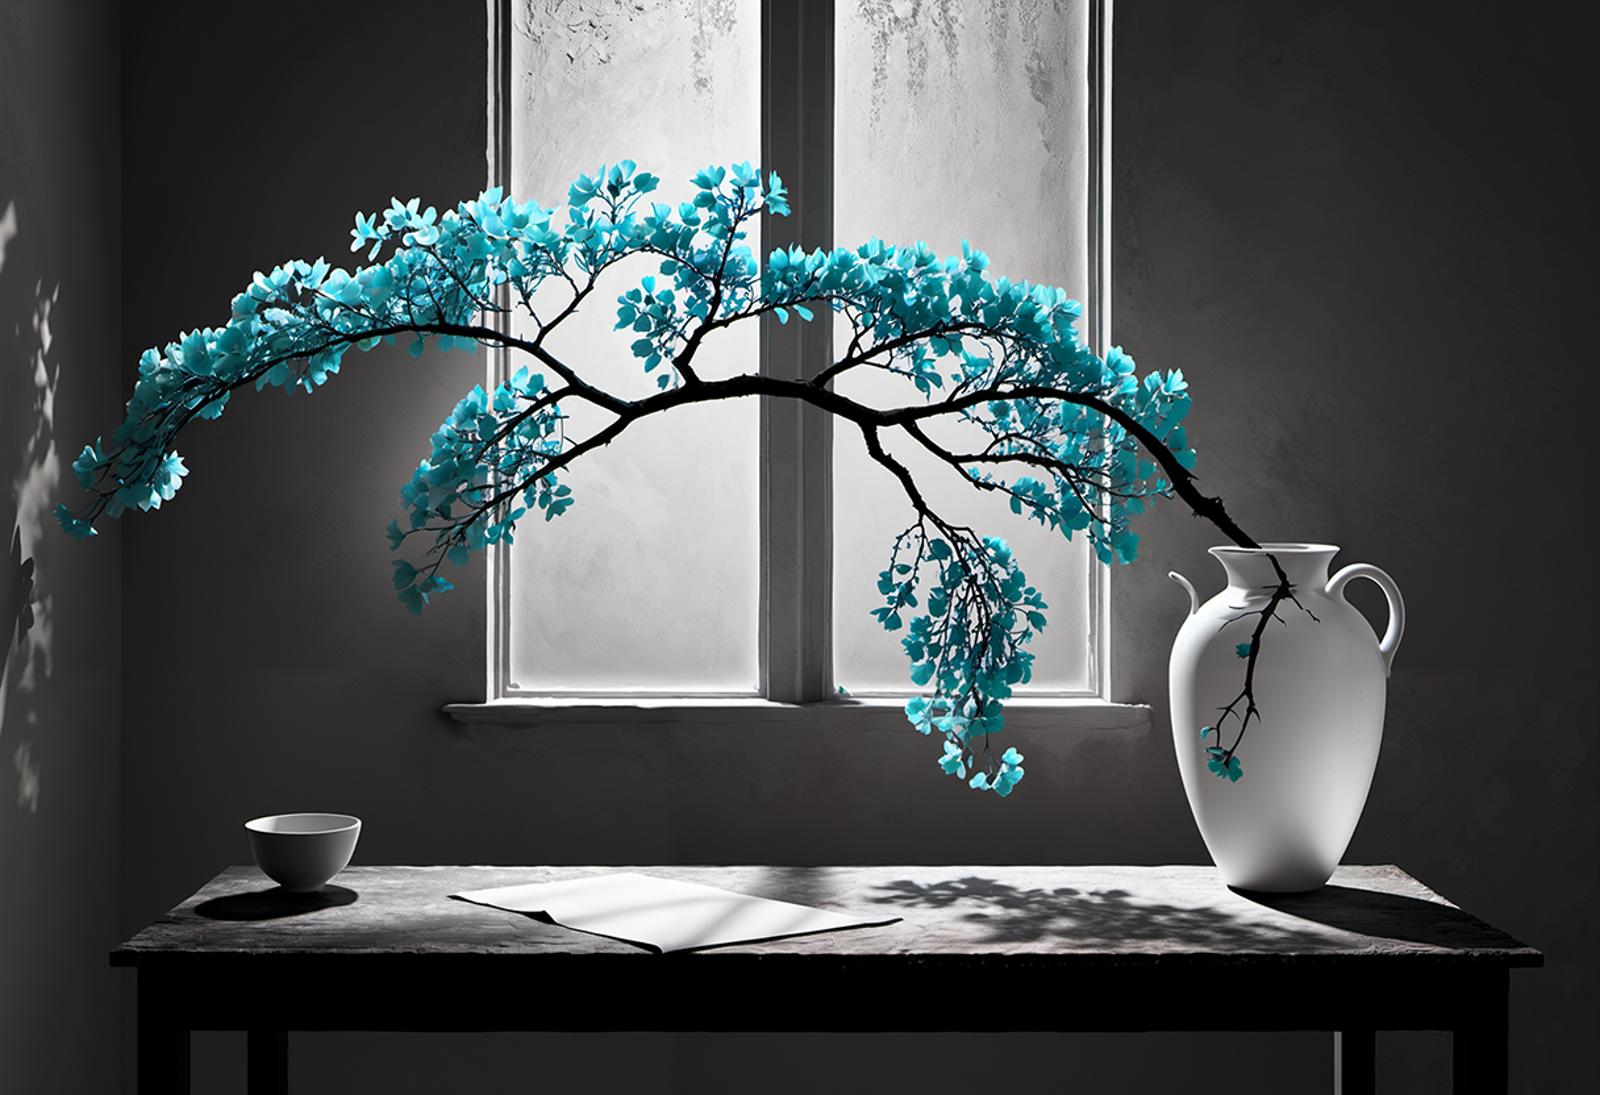 A Bonsai Tree in a White Vase on a Table